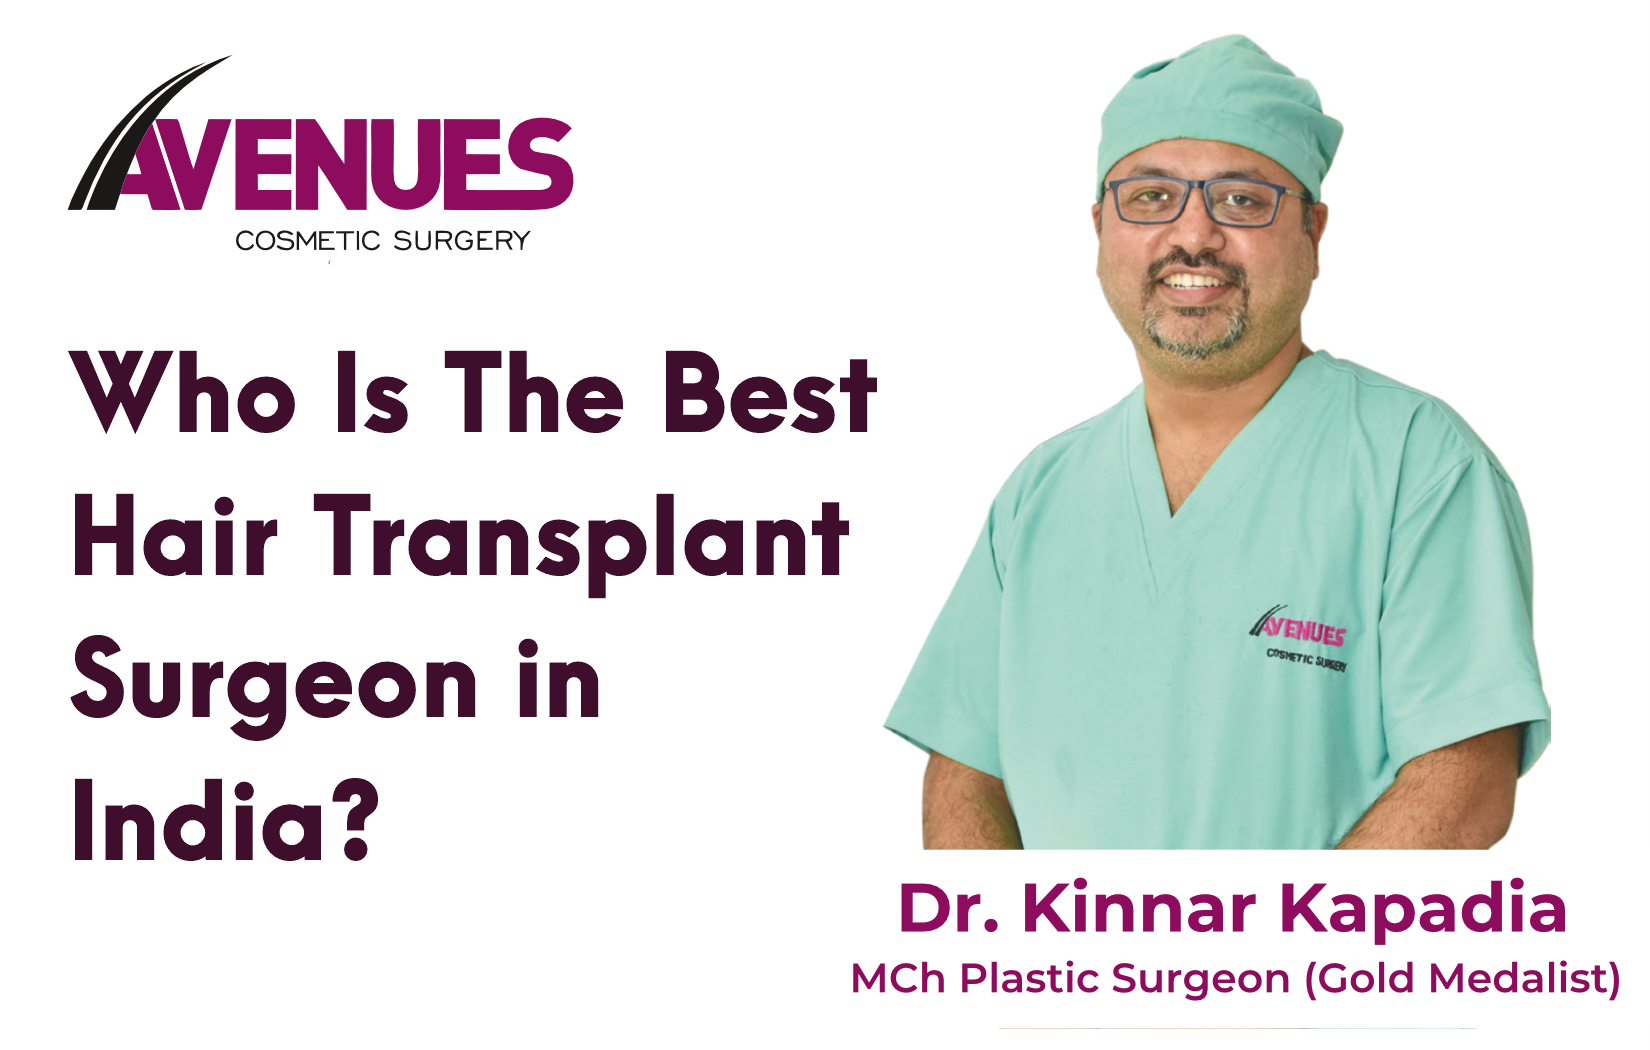 Who Is The Best Hair Transplant Surgeon in India?